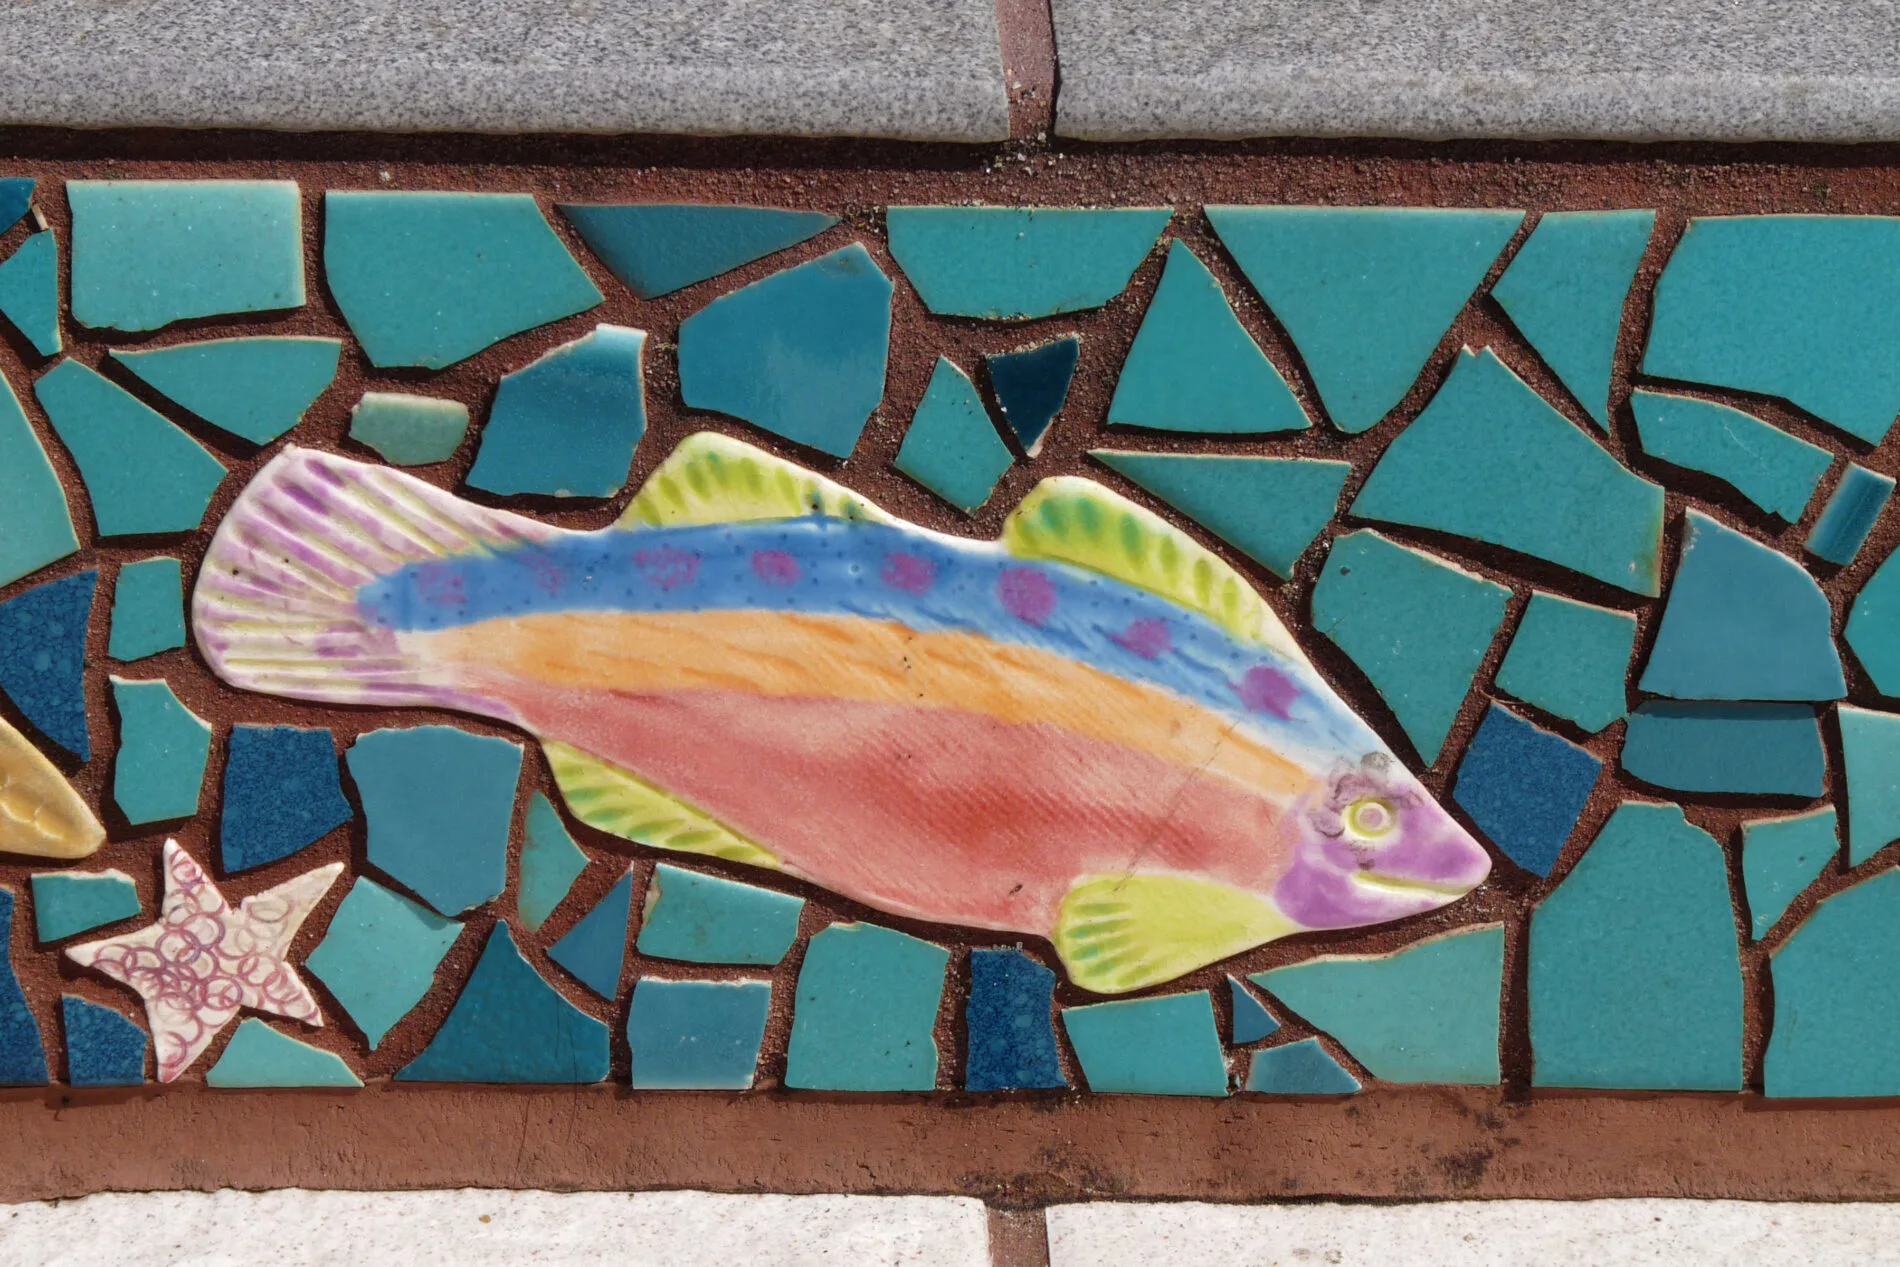 A rainbow trout among the whimsical creatures on the mosaic stairs in San Francisco.